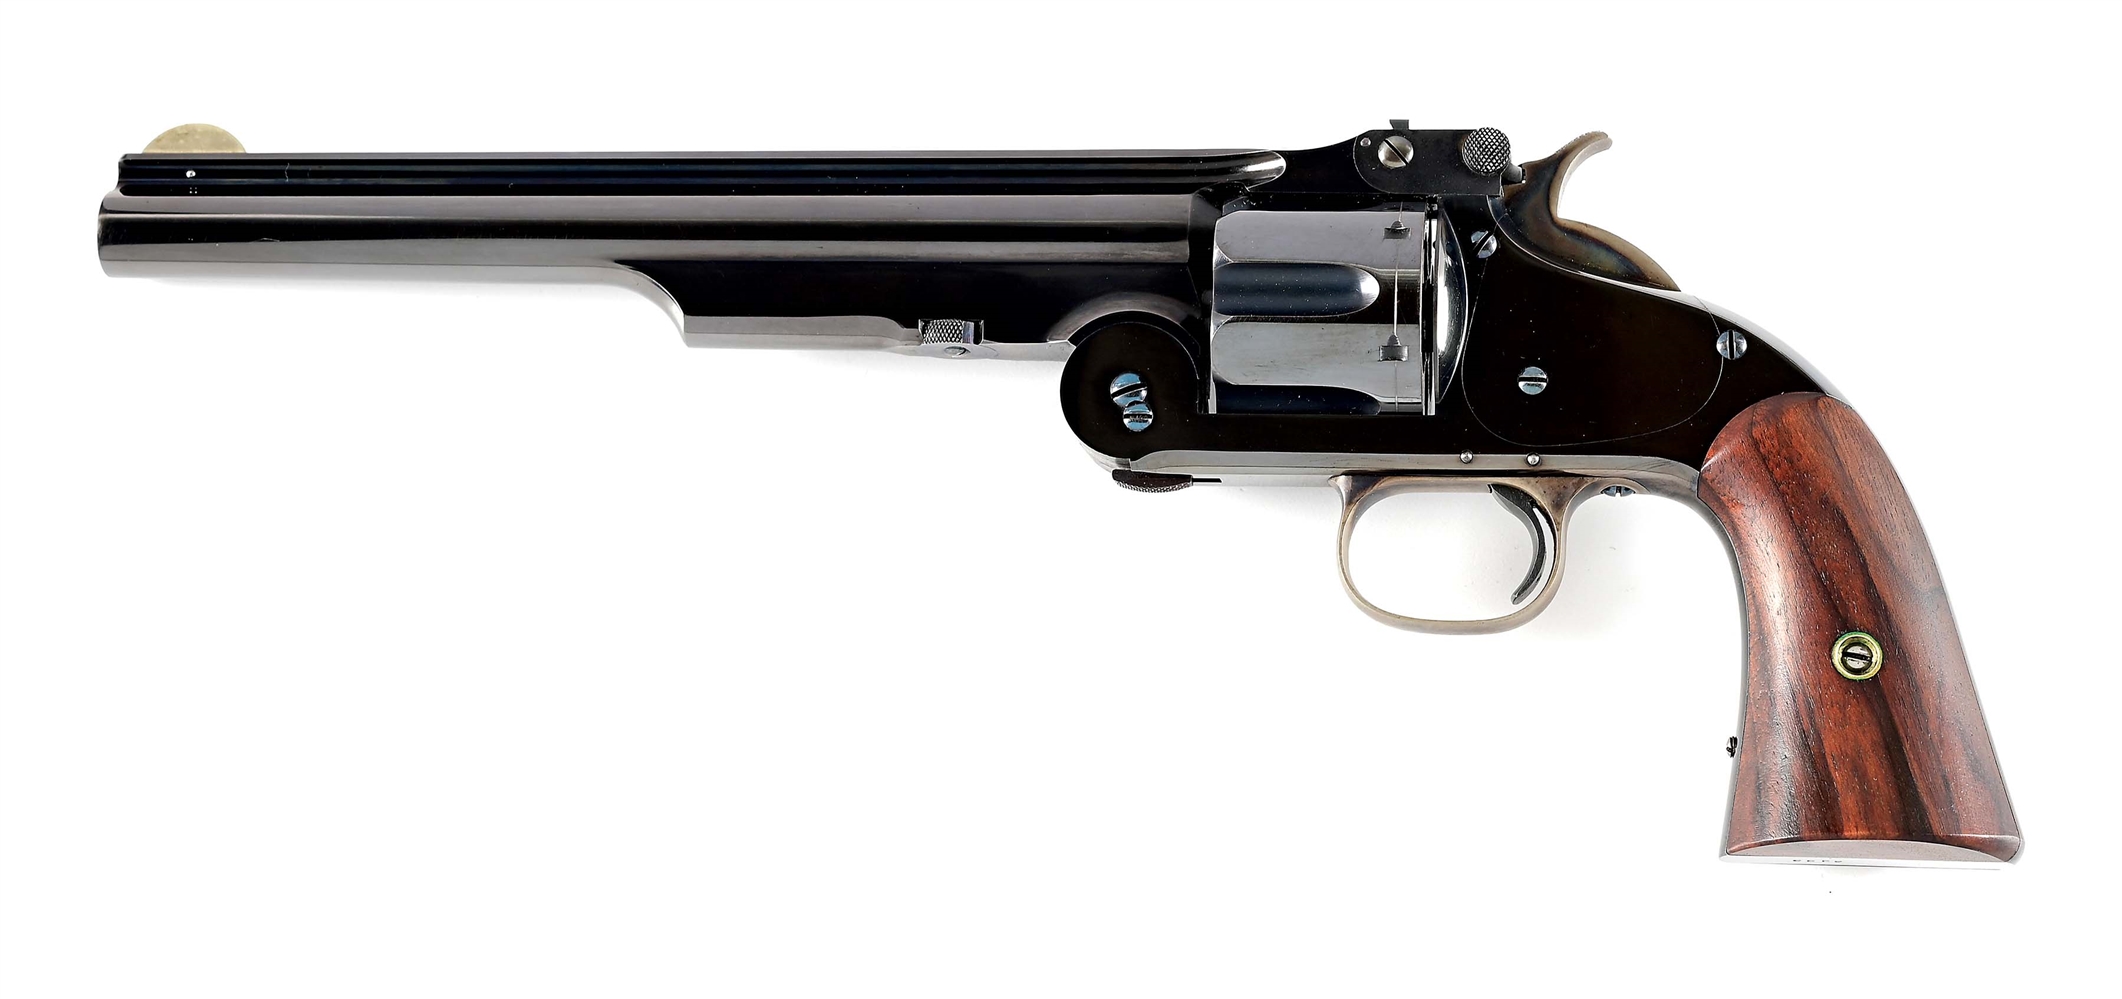 (A) INTRIGUING PROTOTYPE TRANSITIONAL AMERICAN MODEL S&W NO. 3 REVOLVER IN OUTSTANDING CONDITION.